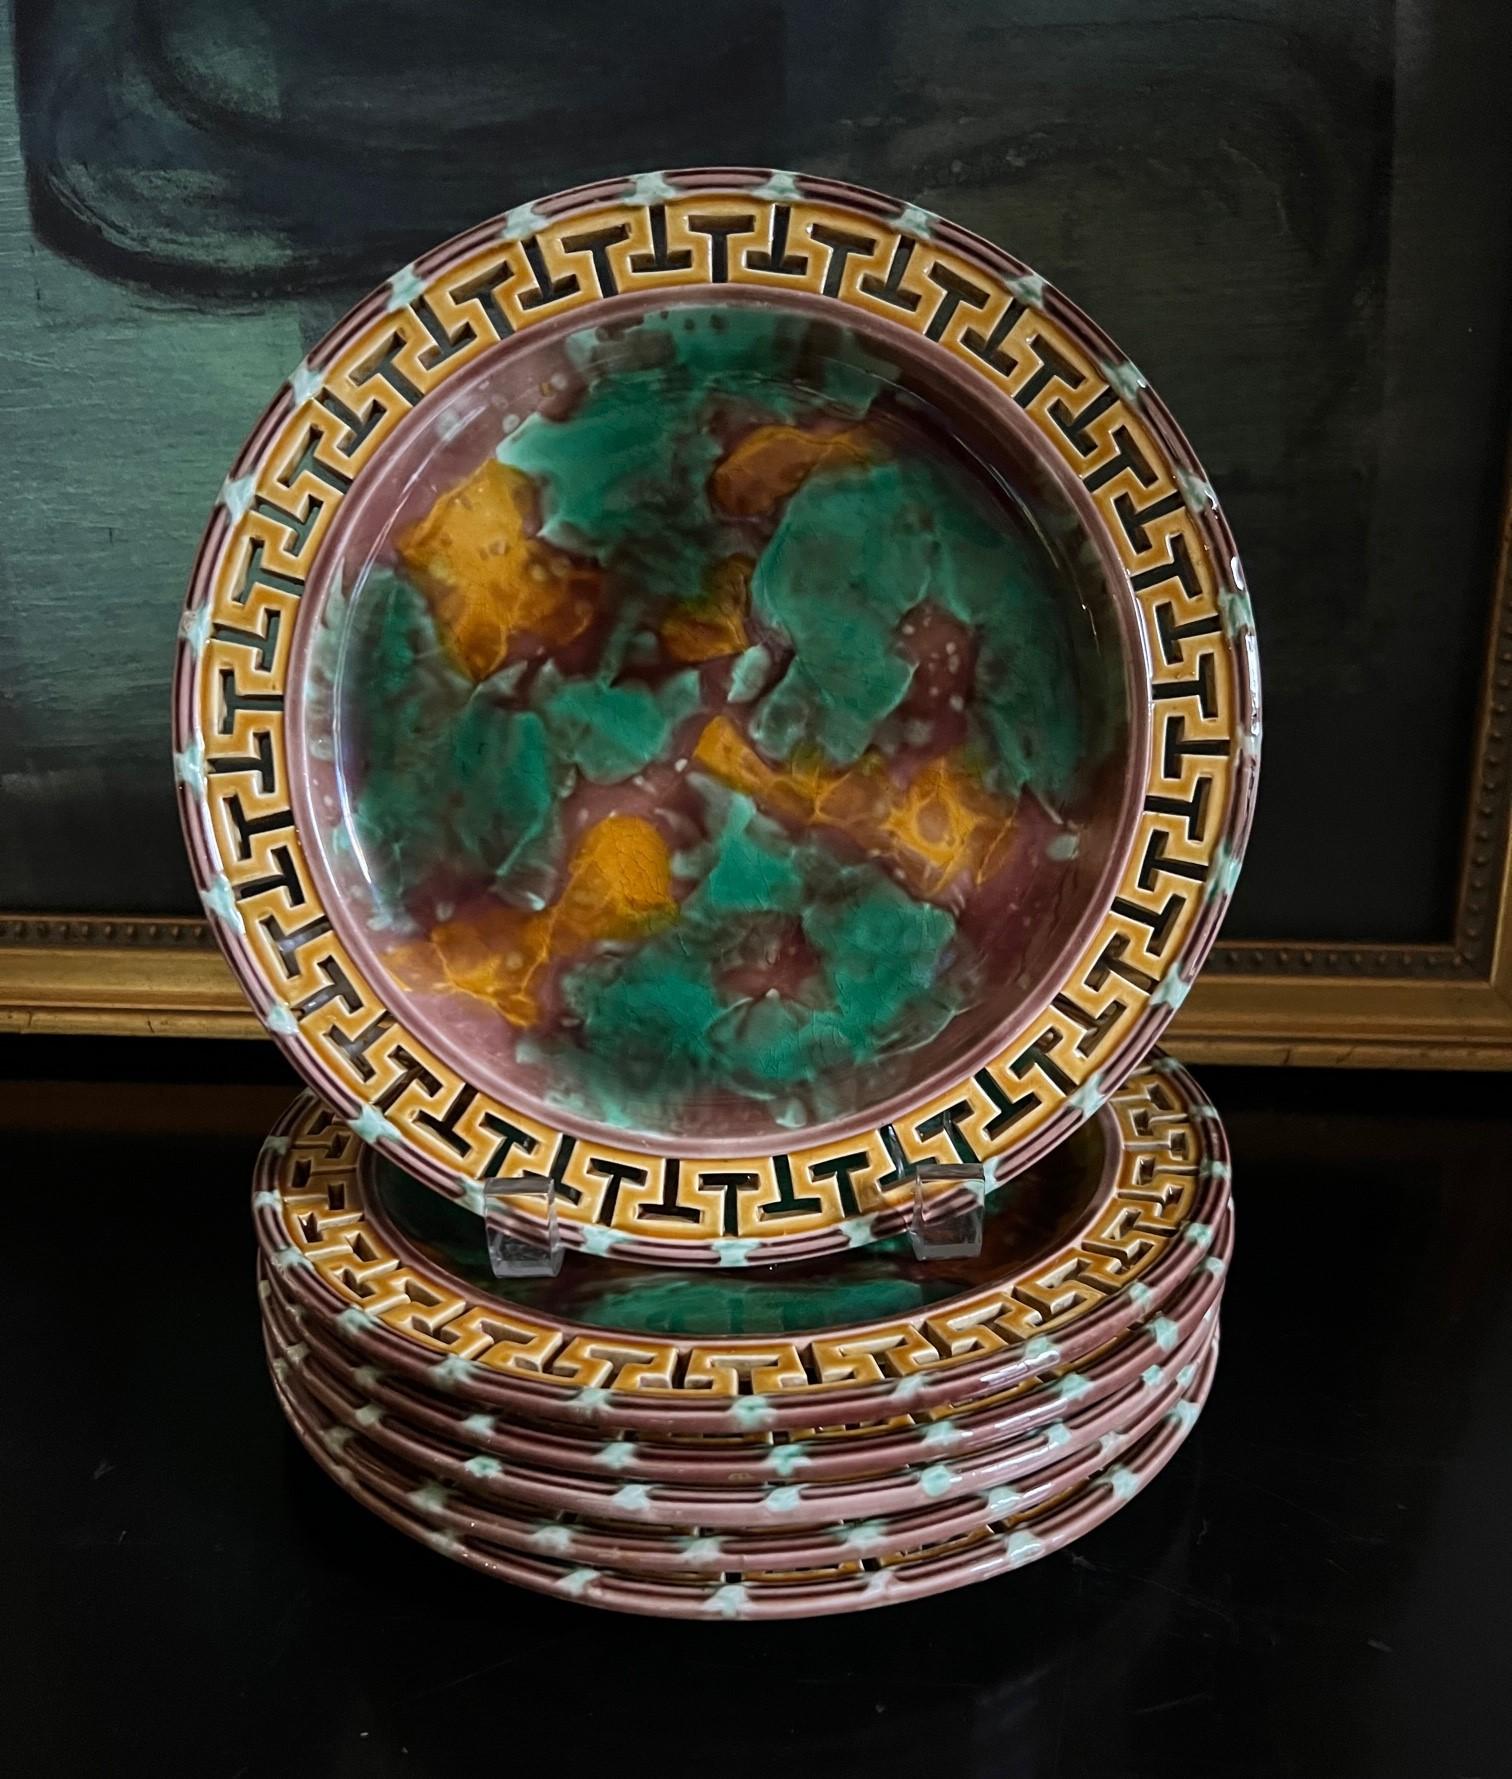 Wedgwood majolica antique plate decorated with a reticulated rim with a tortoise shell style center. Each plate is stamped on the bottom with Wedgwood and includes the impressed mark dating the plates to 1868 as well as the painters marks.

